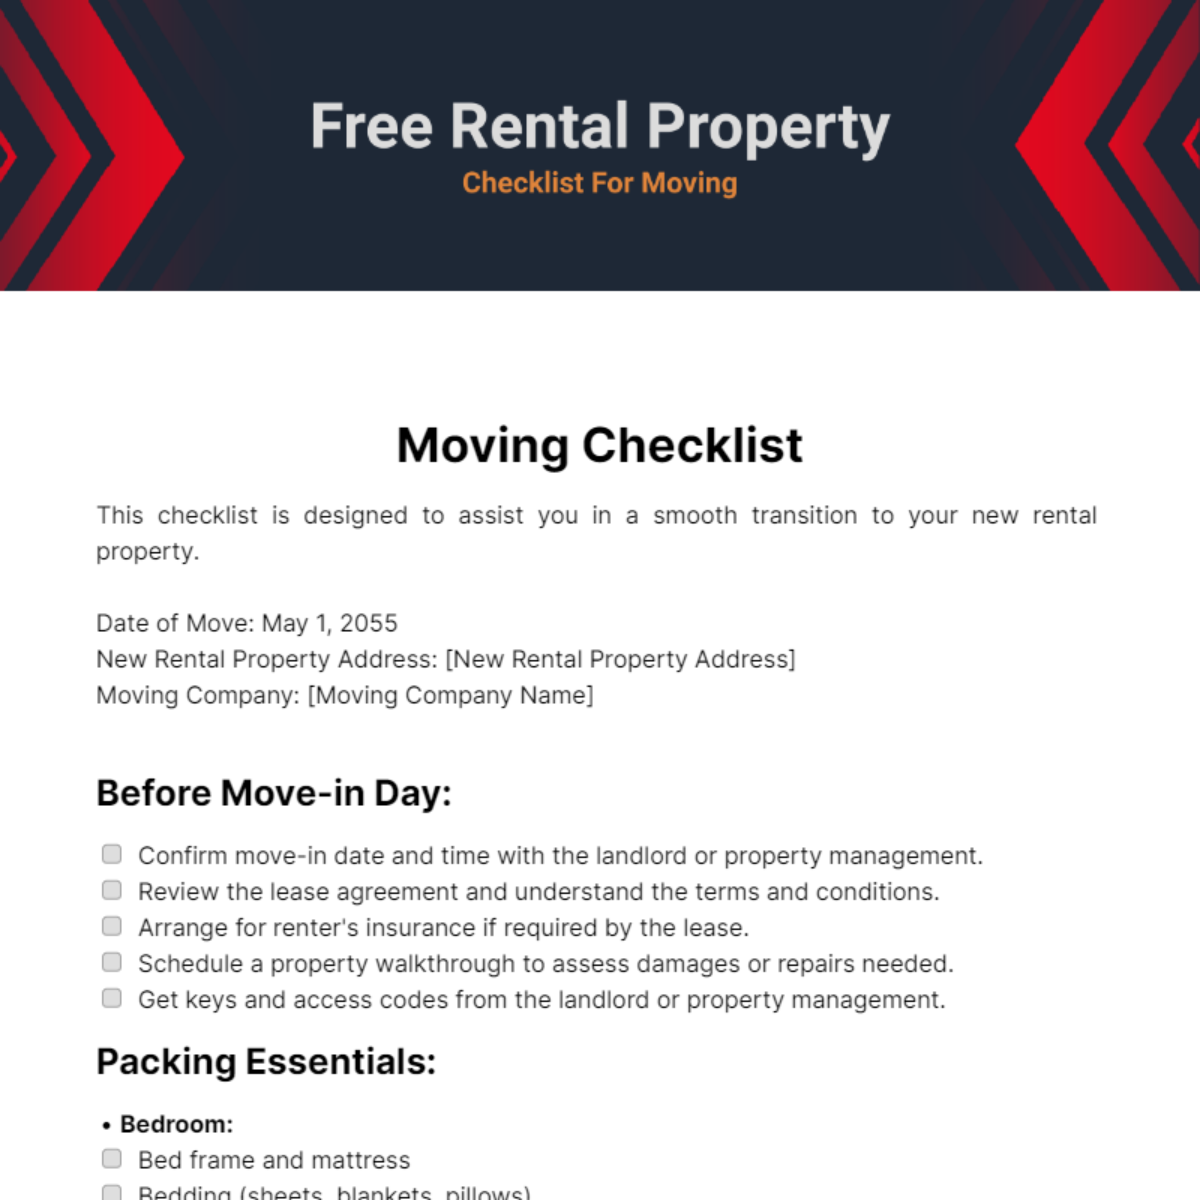 Rental Property Checklist For Moving In Template